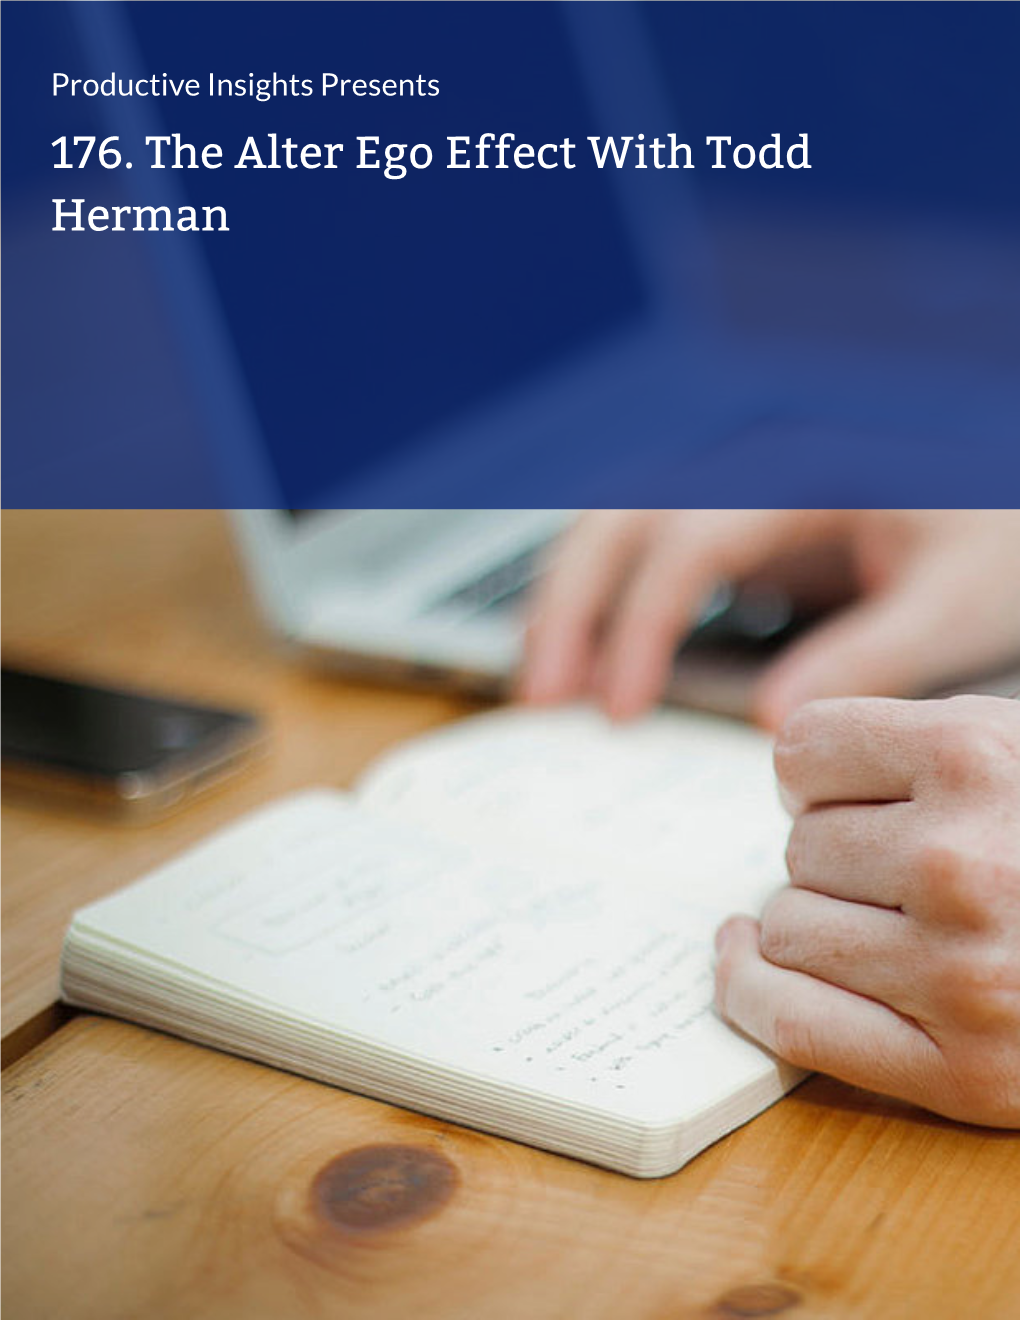 176. the Alter Ego Effect with Todd Herman 176